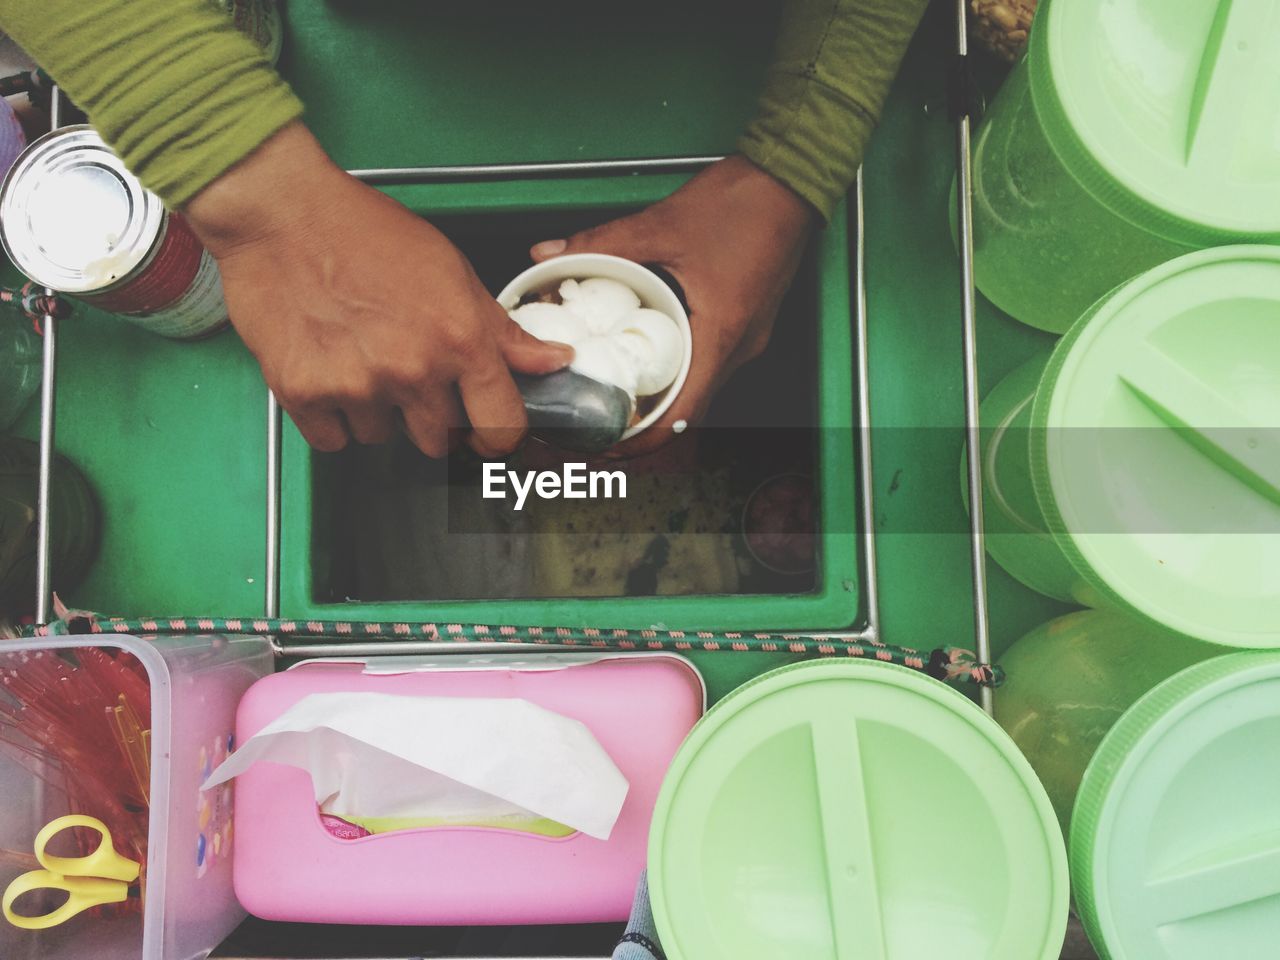 Cropped image of vendor filling coconut ice cream scoops in cup at concession stand